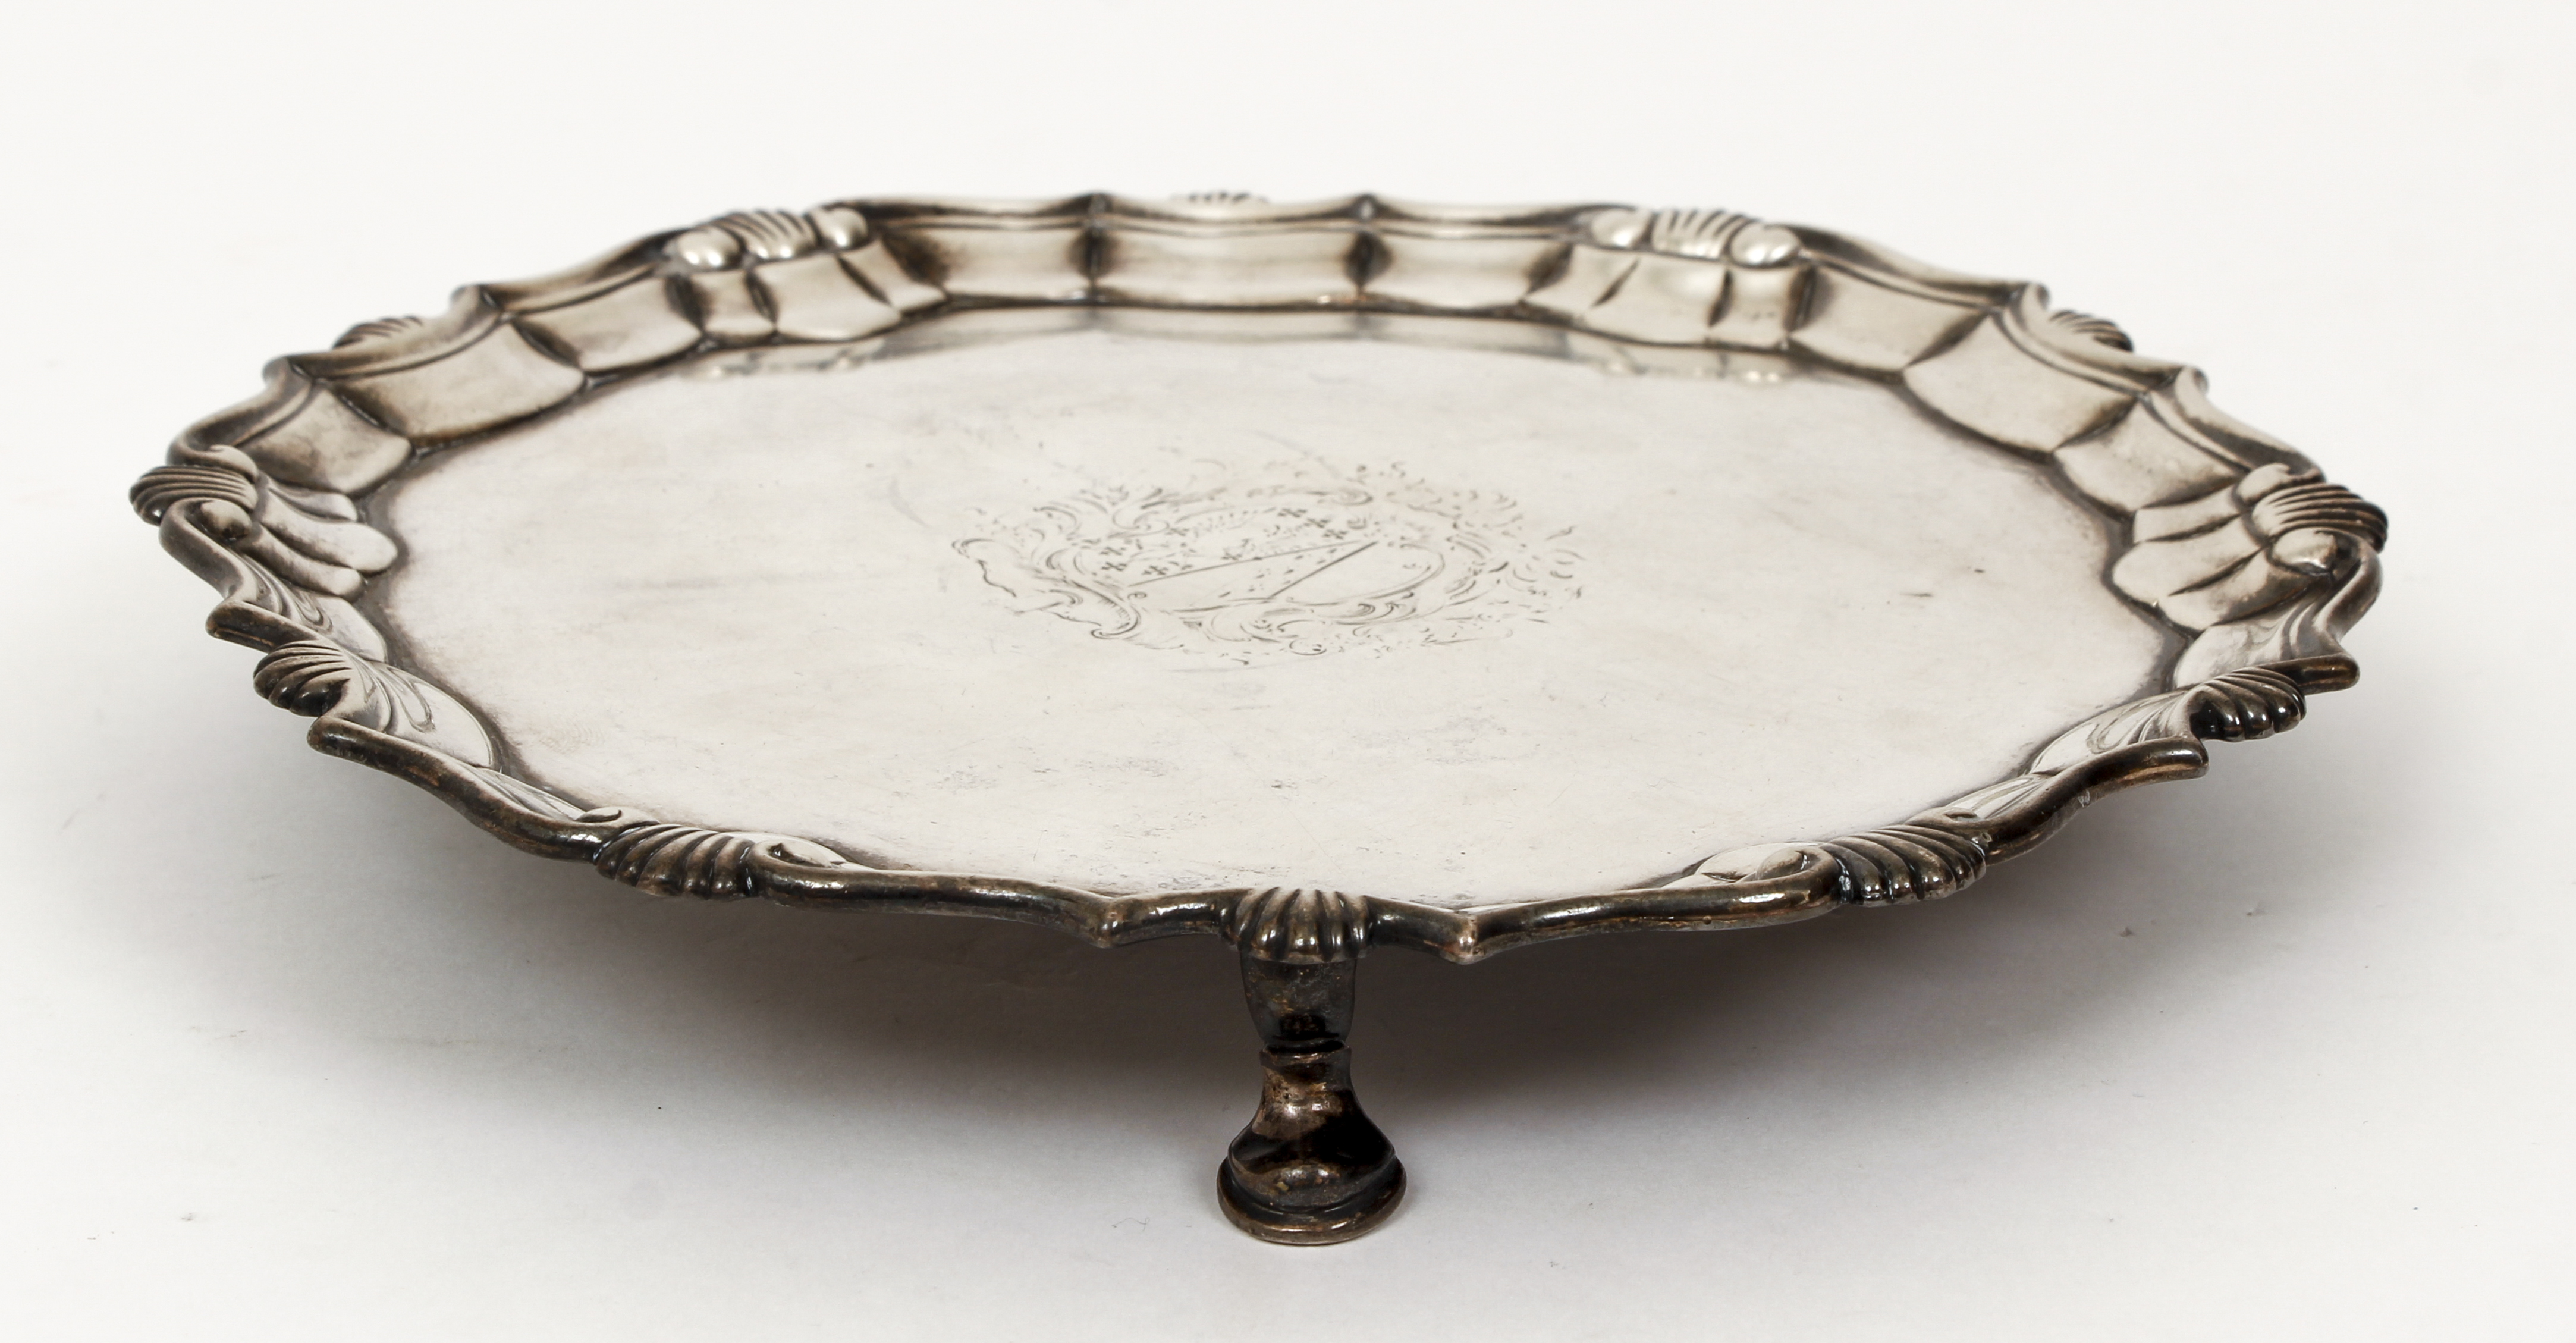 Richard Beale Silver Salver 1742 - Image 2 of 5